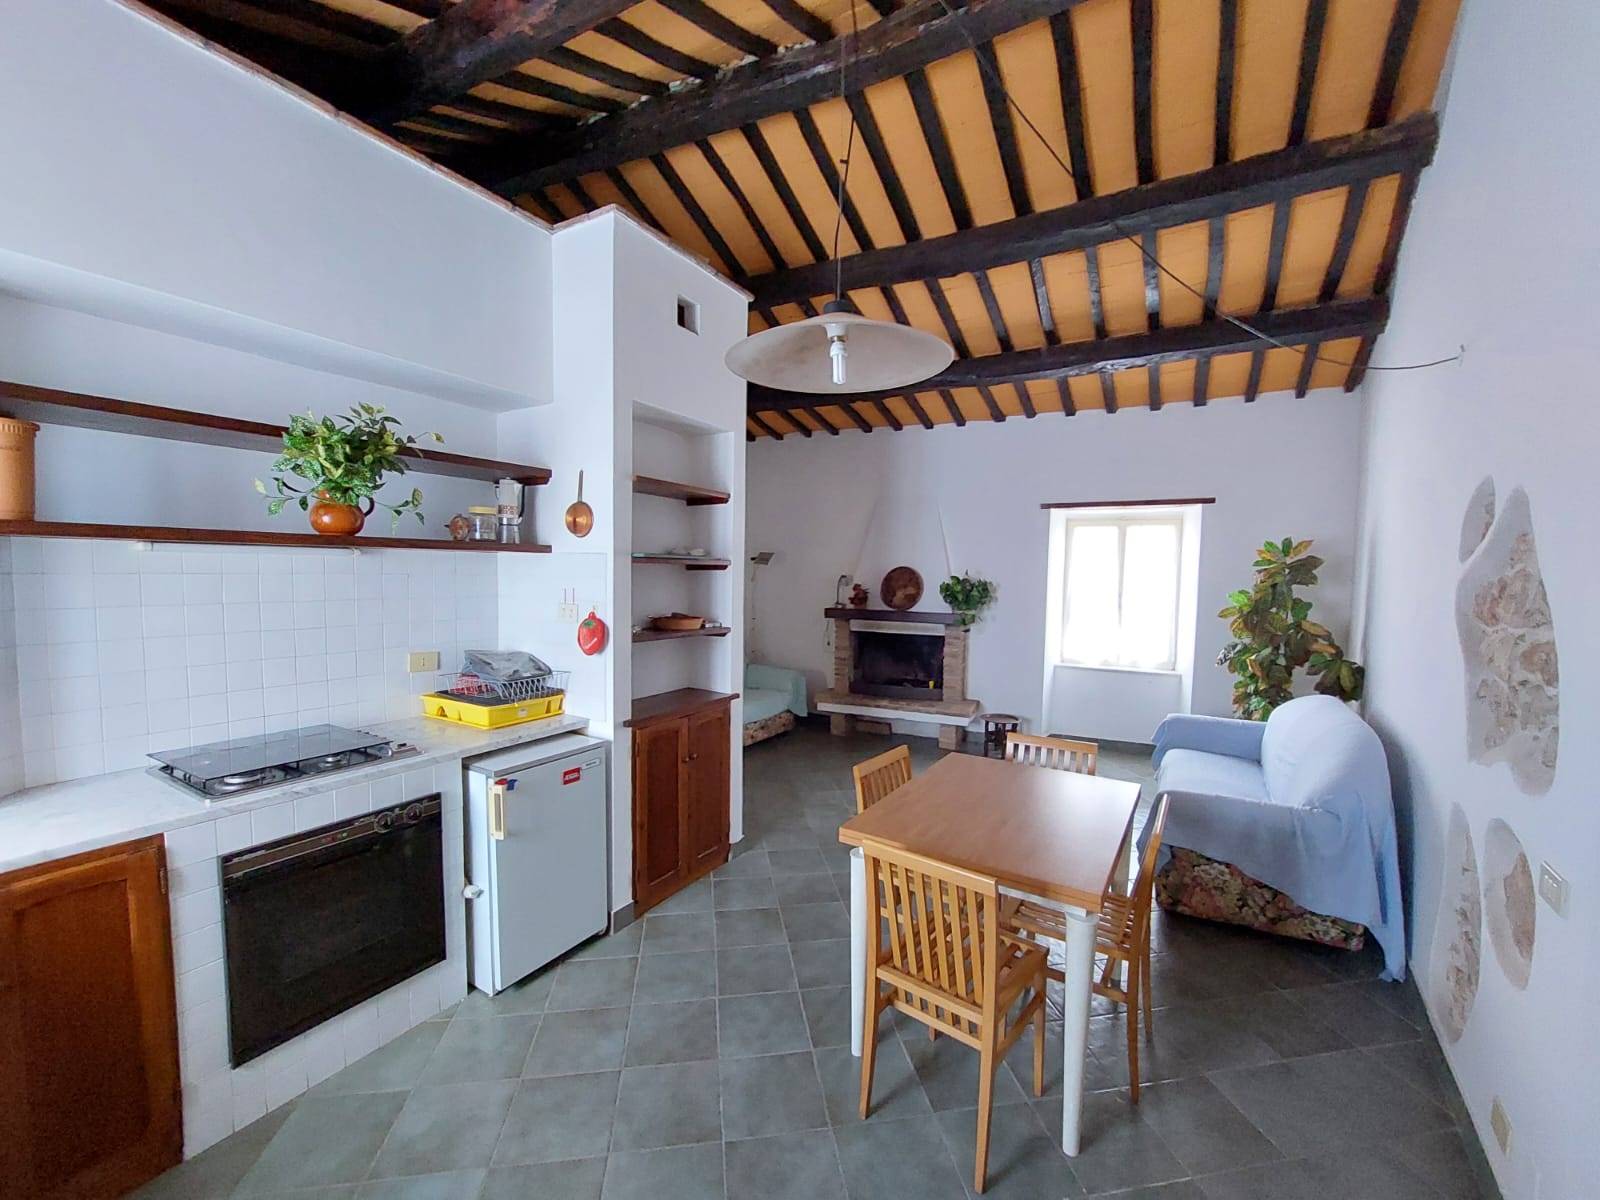 ALLUMIERE, Apartment for sale of 45 Sq. mt., Habitable, Heating Individual heating system, Energetic class: G, placed at 1° on 1, composed by: 1 Room, Separate kitchen, , 1 Bathroom, Price: € 38,000